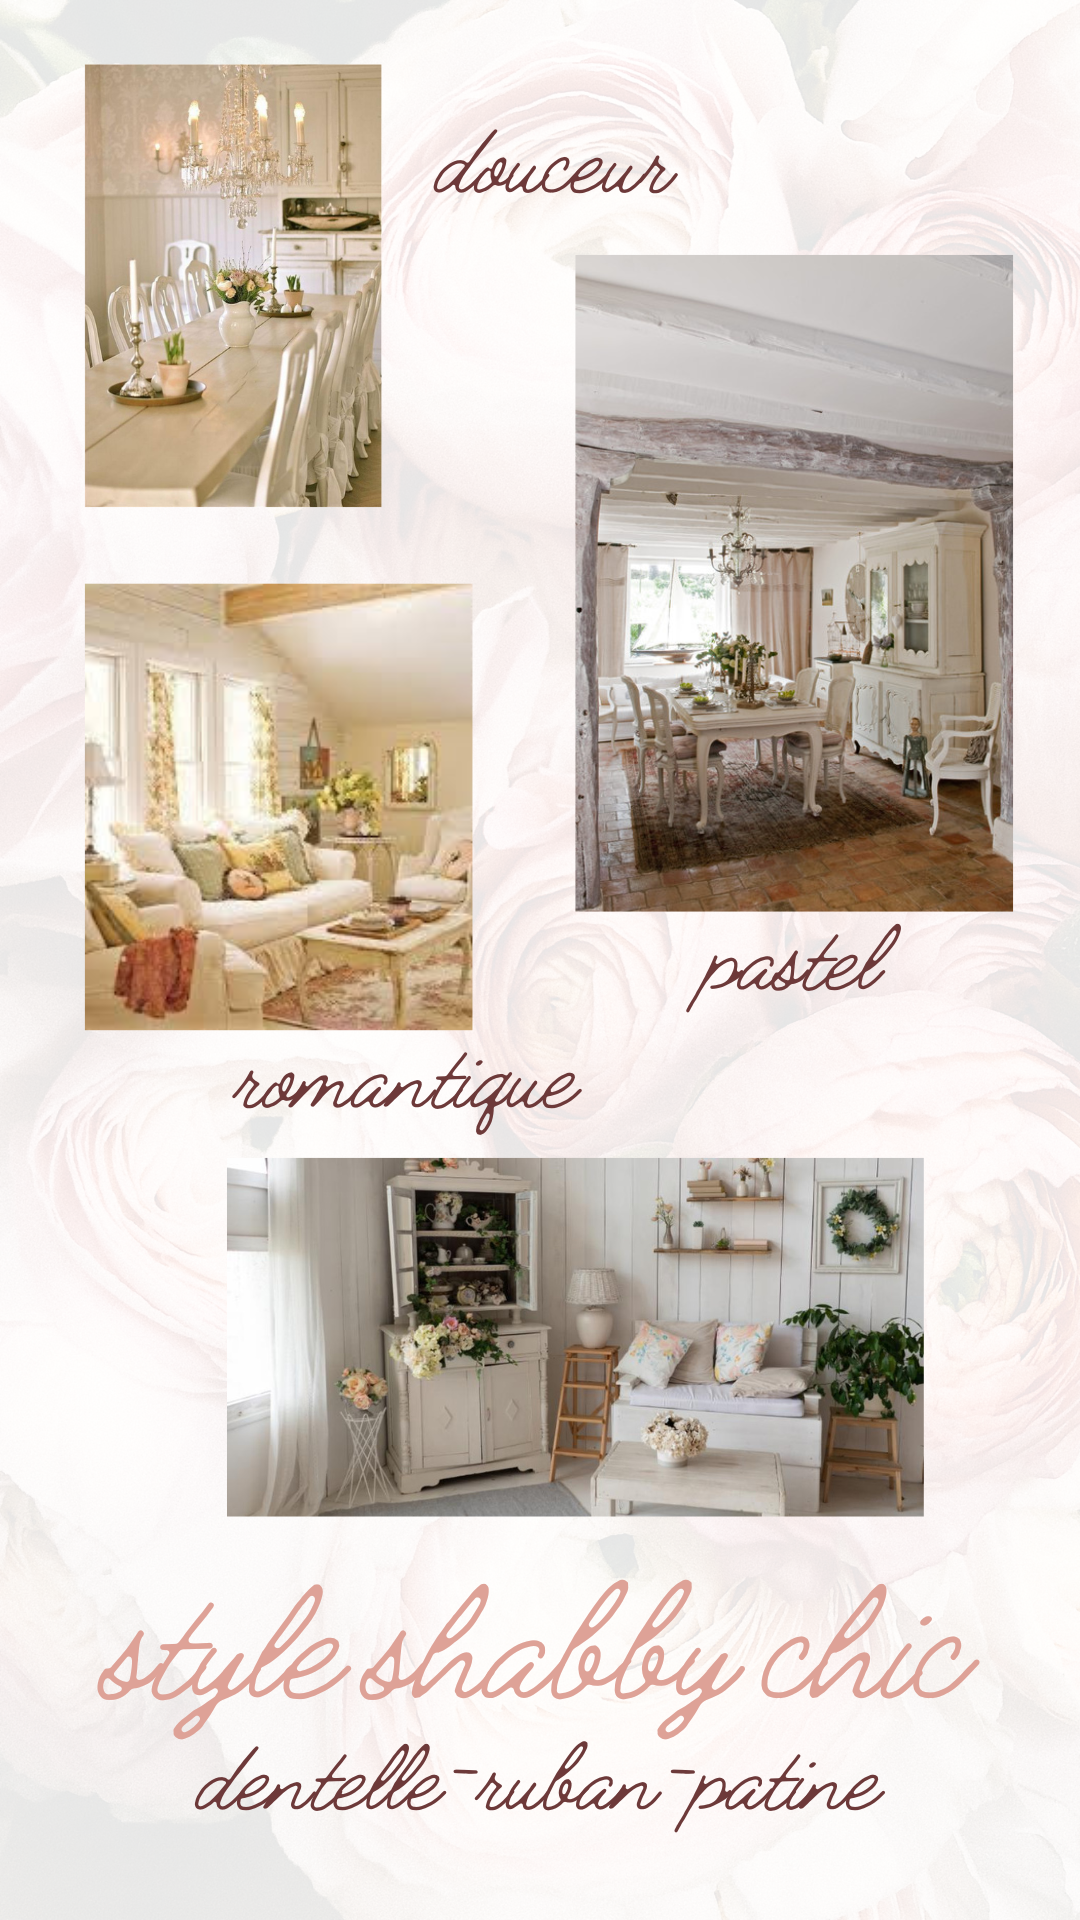 1. Décoration style shabby chic 2. Ambiance romantique shabby chic 3. Meubles et accessoires shabby chic 4. Élégance vintage shabby chic 5. Tendance shabby chic moderne 6. Inspiration shabby chic contemporaine 7. Couleurs pastel shabby chic 8. Motifs floraux shabby chic 9. Créer un intérieur shabby chic 10. Atmosphère décontractée shabby chic 11. Shabby chic et récupération 12. Harmonie shabby chic intérieure 13. Mélange de styles shabby chic 14. Palette de couleurs shabby chic 15. Déco shabby chic romantique 16. Accessoires shabby chic modernes 17. Textiles shabby chic dans la décoration 18. Design intérieur style shabby chic 19. Éléments vintage shabby chic 20. Atmosphère chaleureuse shabby chic.